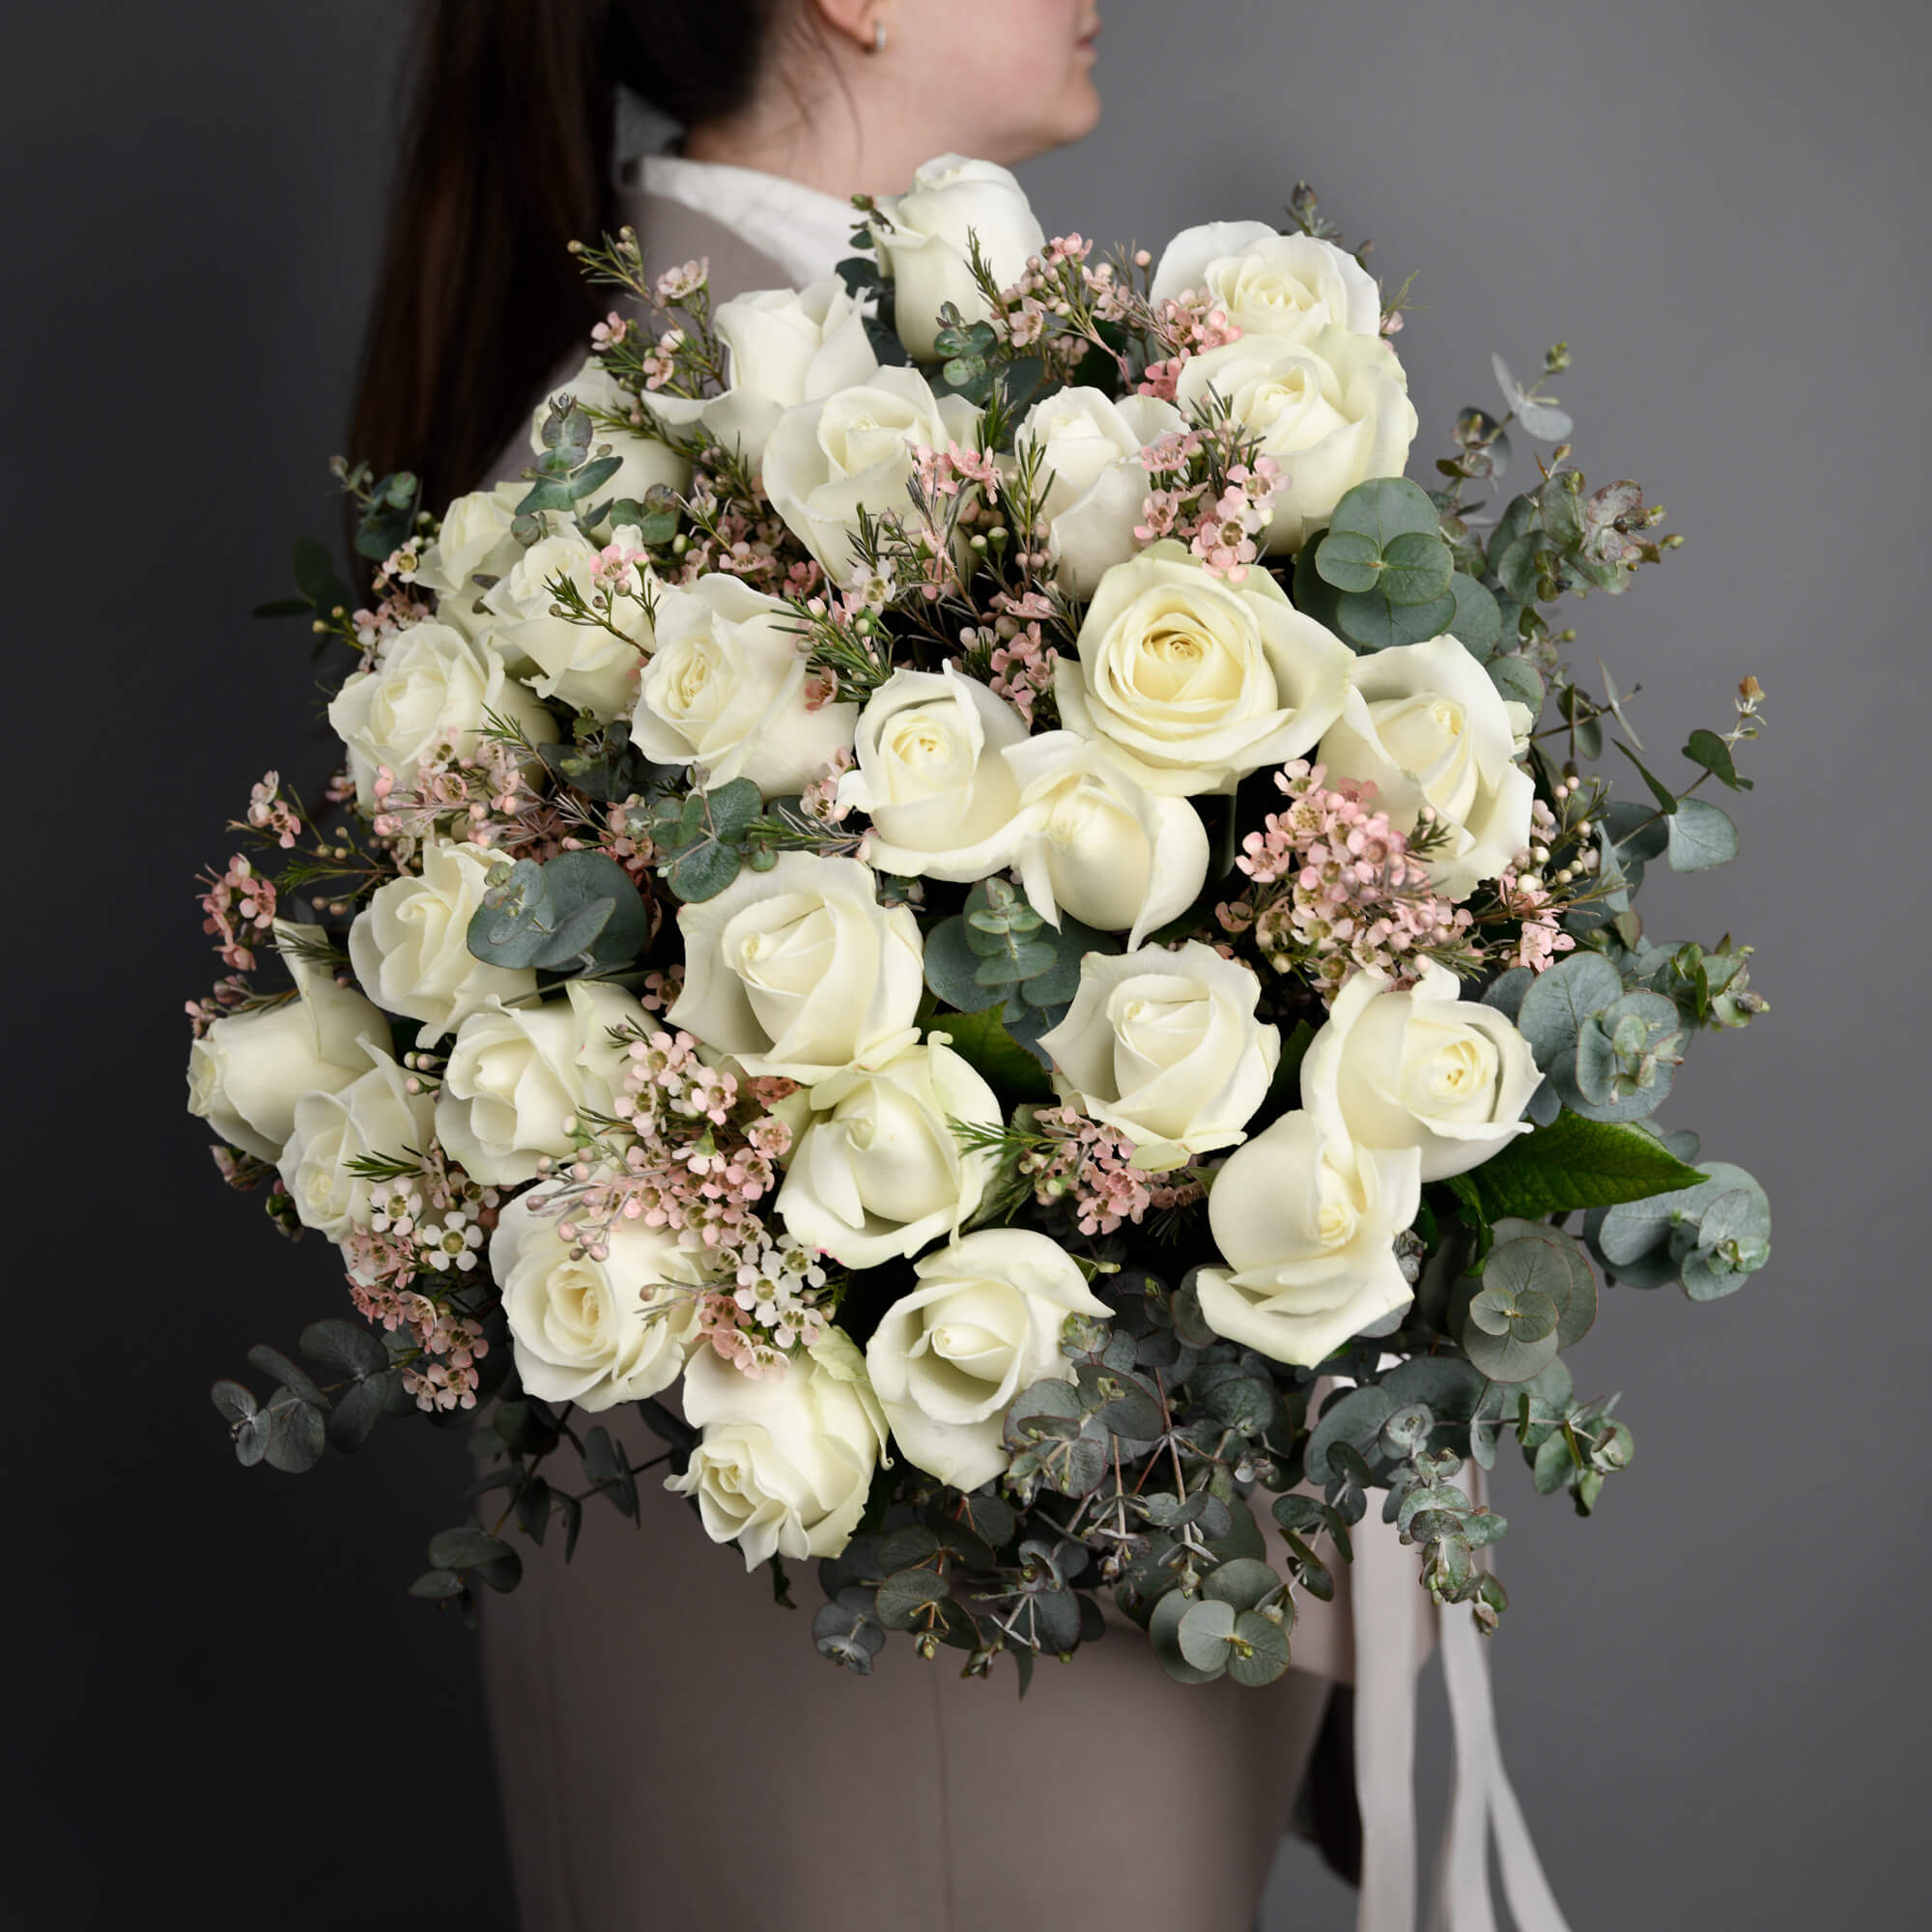 Bouquet with white roses and wax